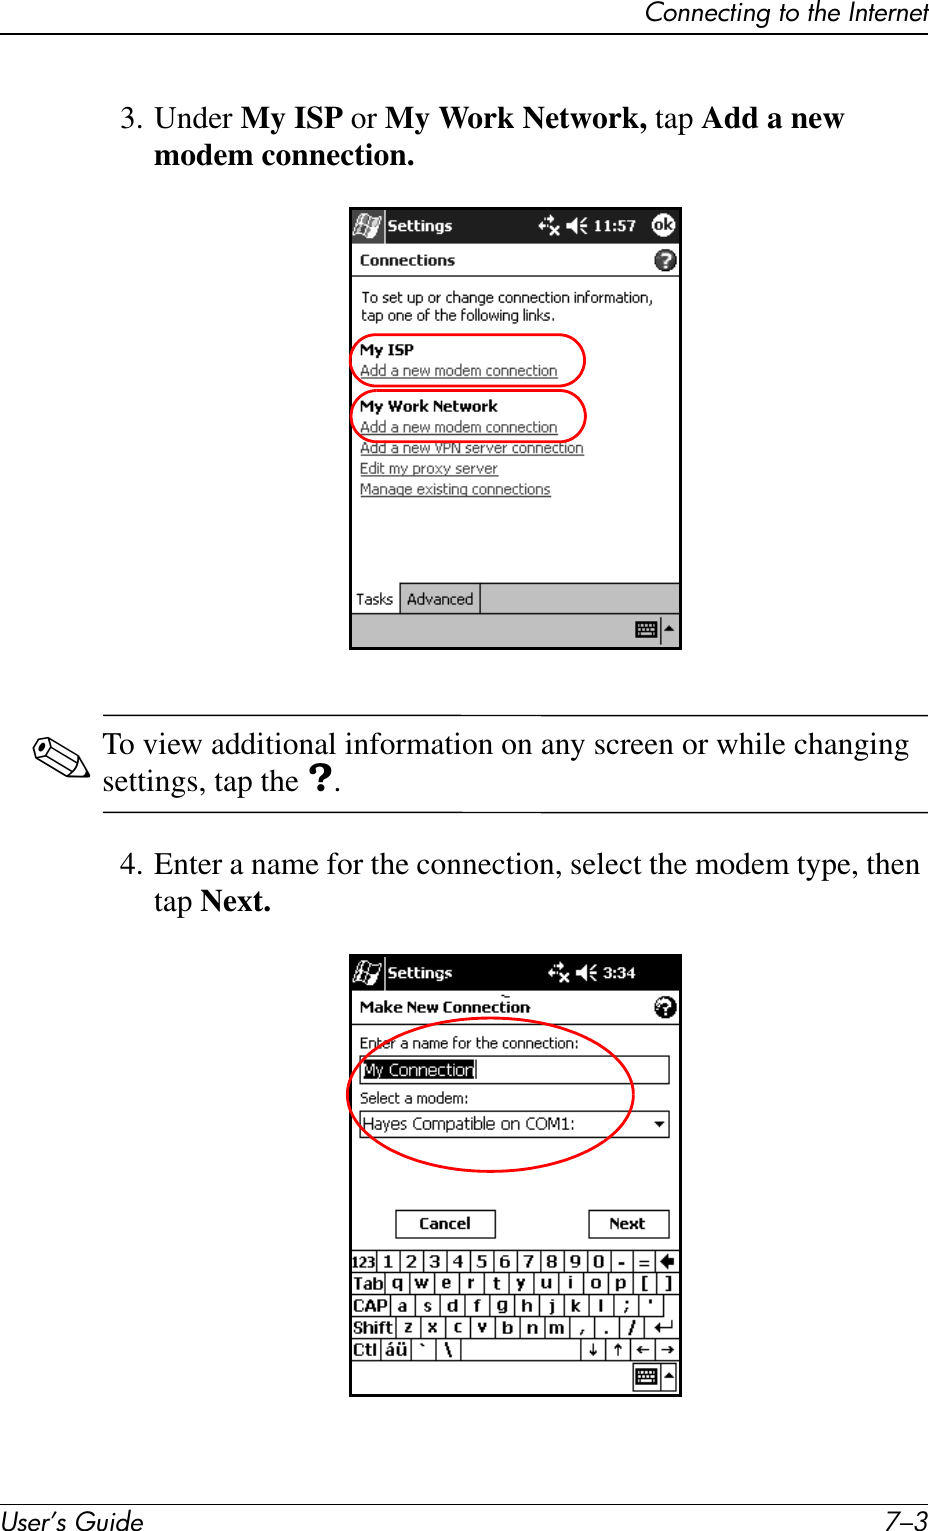 Connecting to the InternetUser’s Guide 7–33. Under My ISP or My Work Network, tap Add a new modem connection.✎To view additional information on any screen or while changing settings, tap the ?.4. Enter a name for the connection, select the modem type, then tap Next.